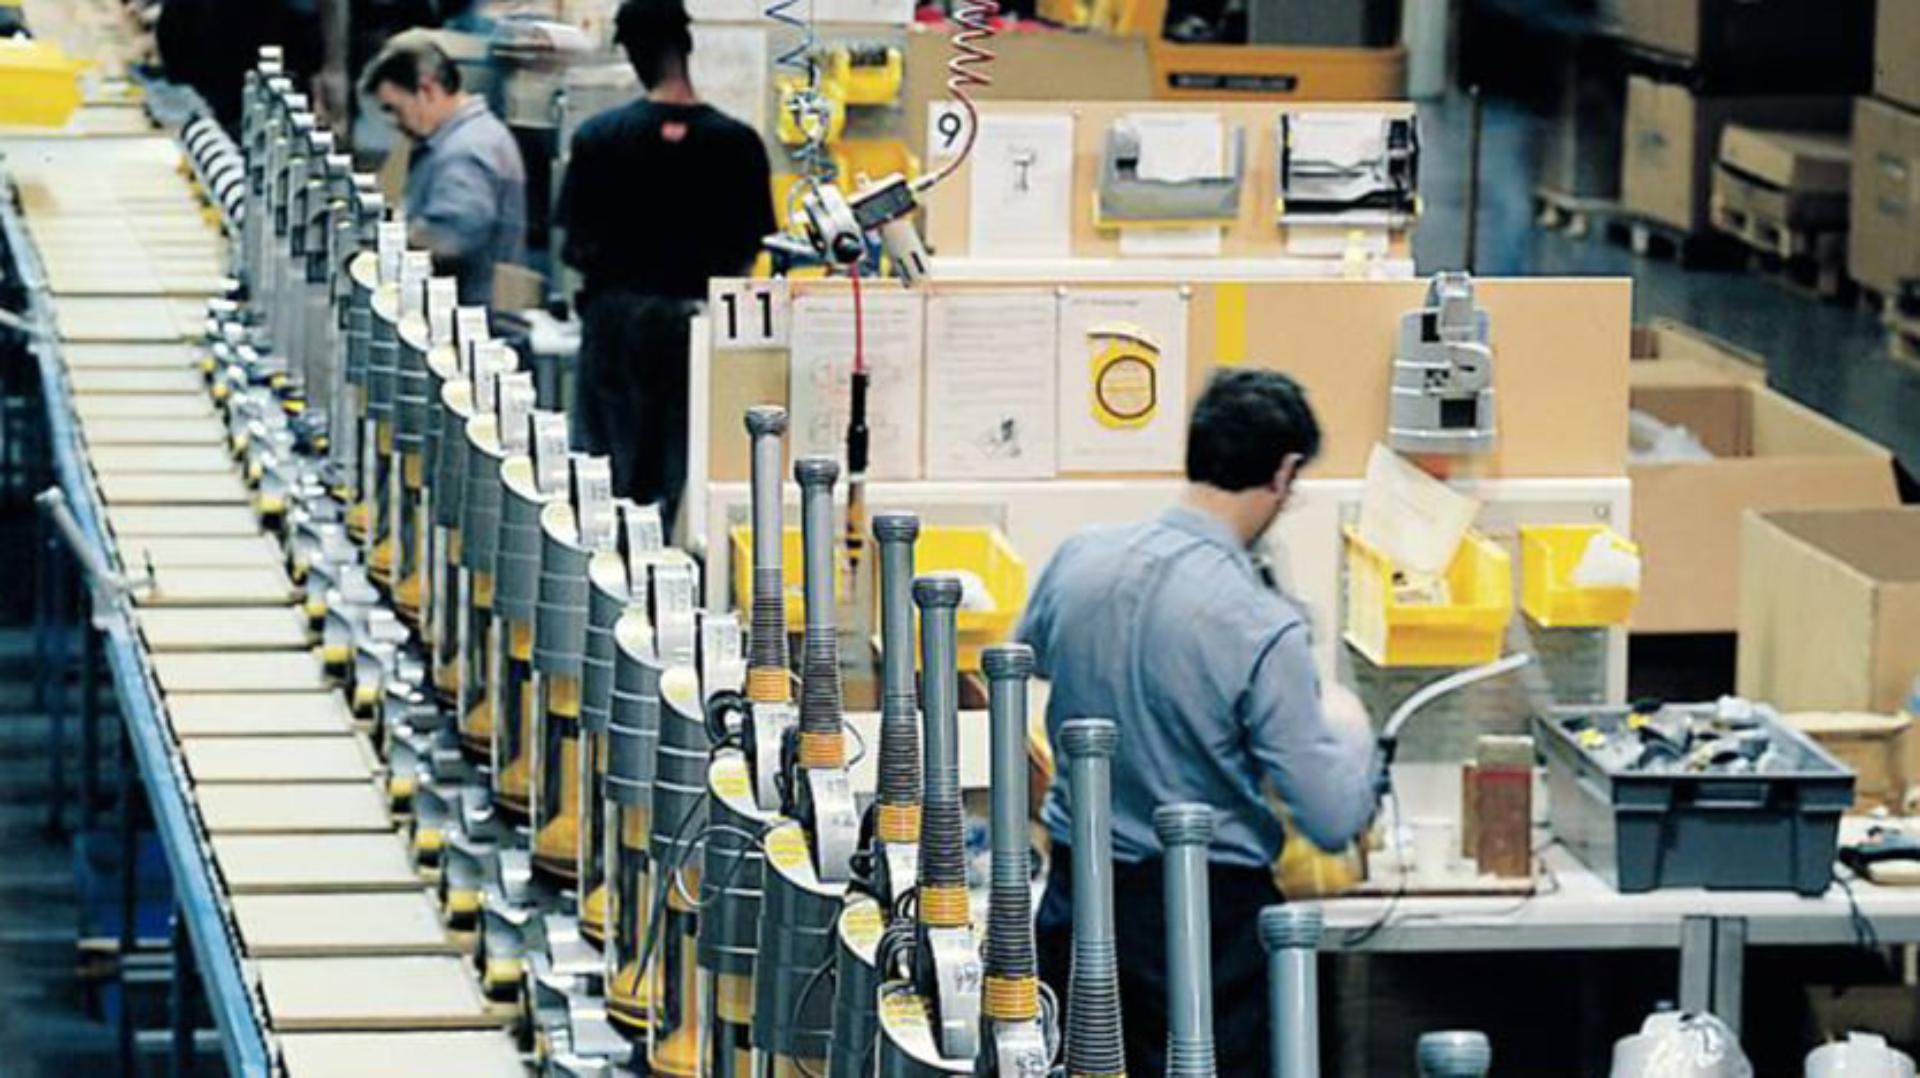 DCO1 production line showing Dyson machines and the packaging